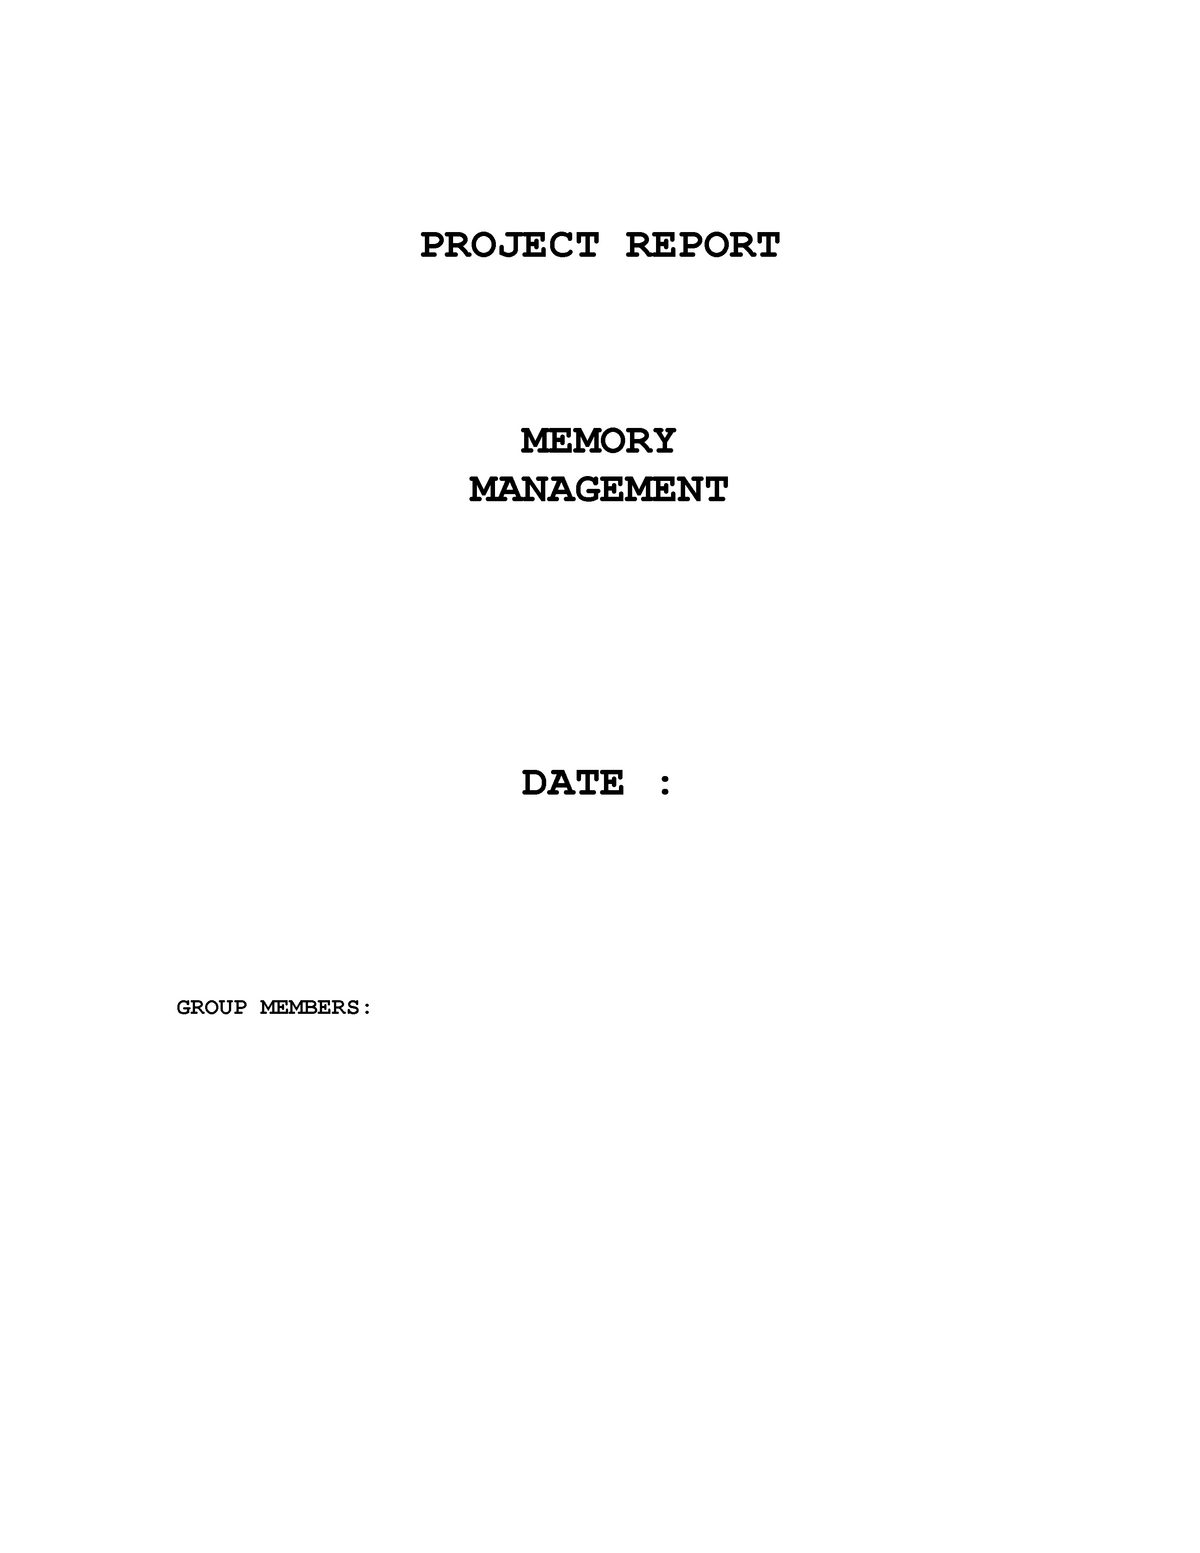 Memory Management in Operational Management System - PROJECT REPORT ...